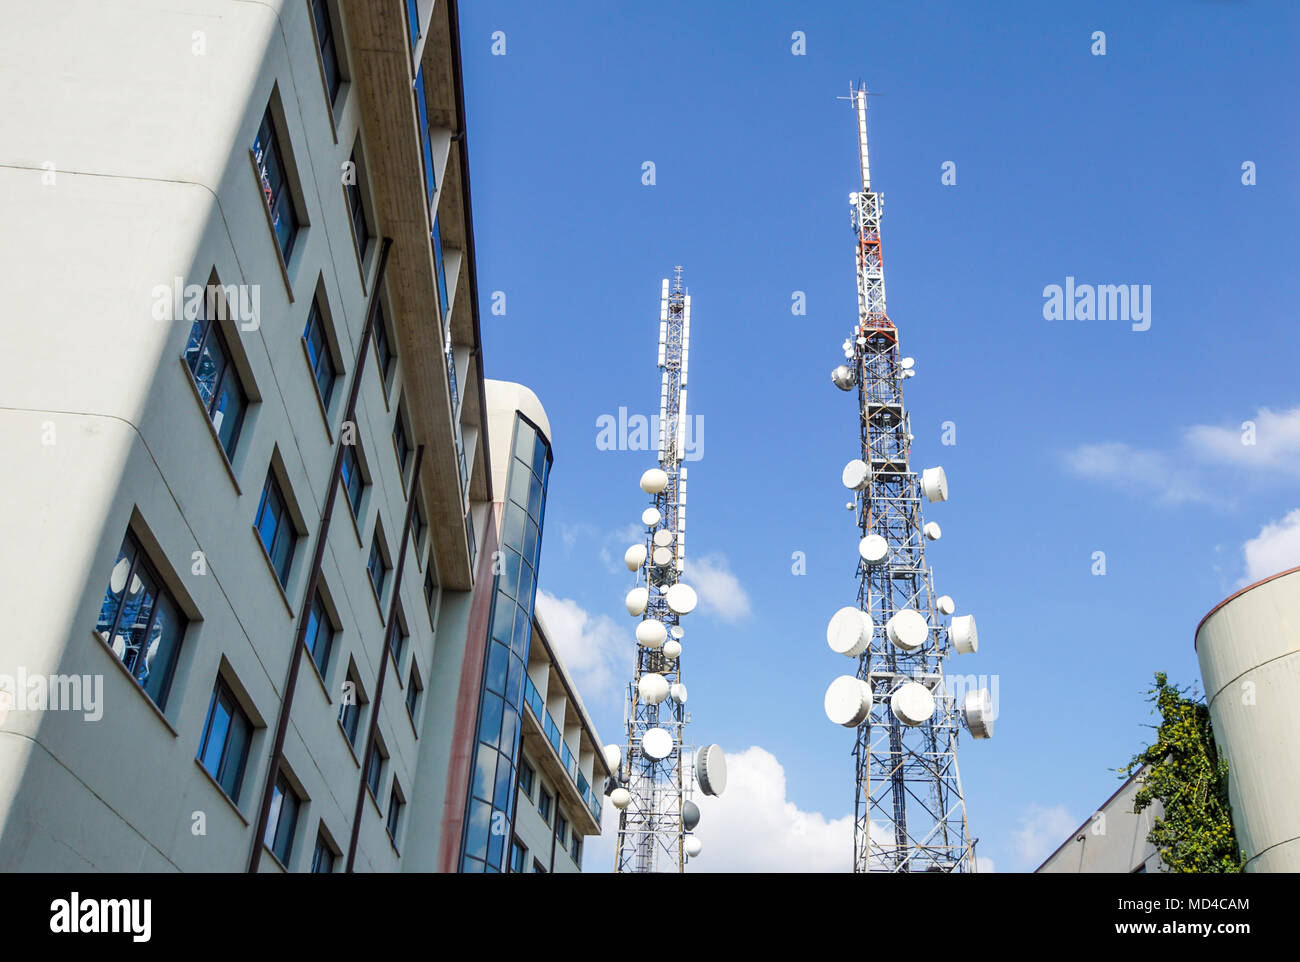 Mobile phone communication antenna tower with satellite dish on blue sky background, Telecommunication tower Stock Photo